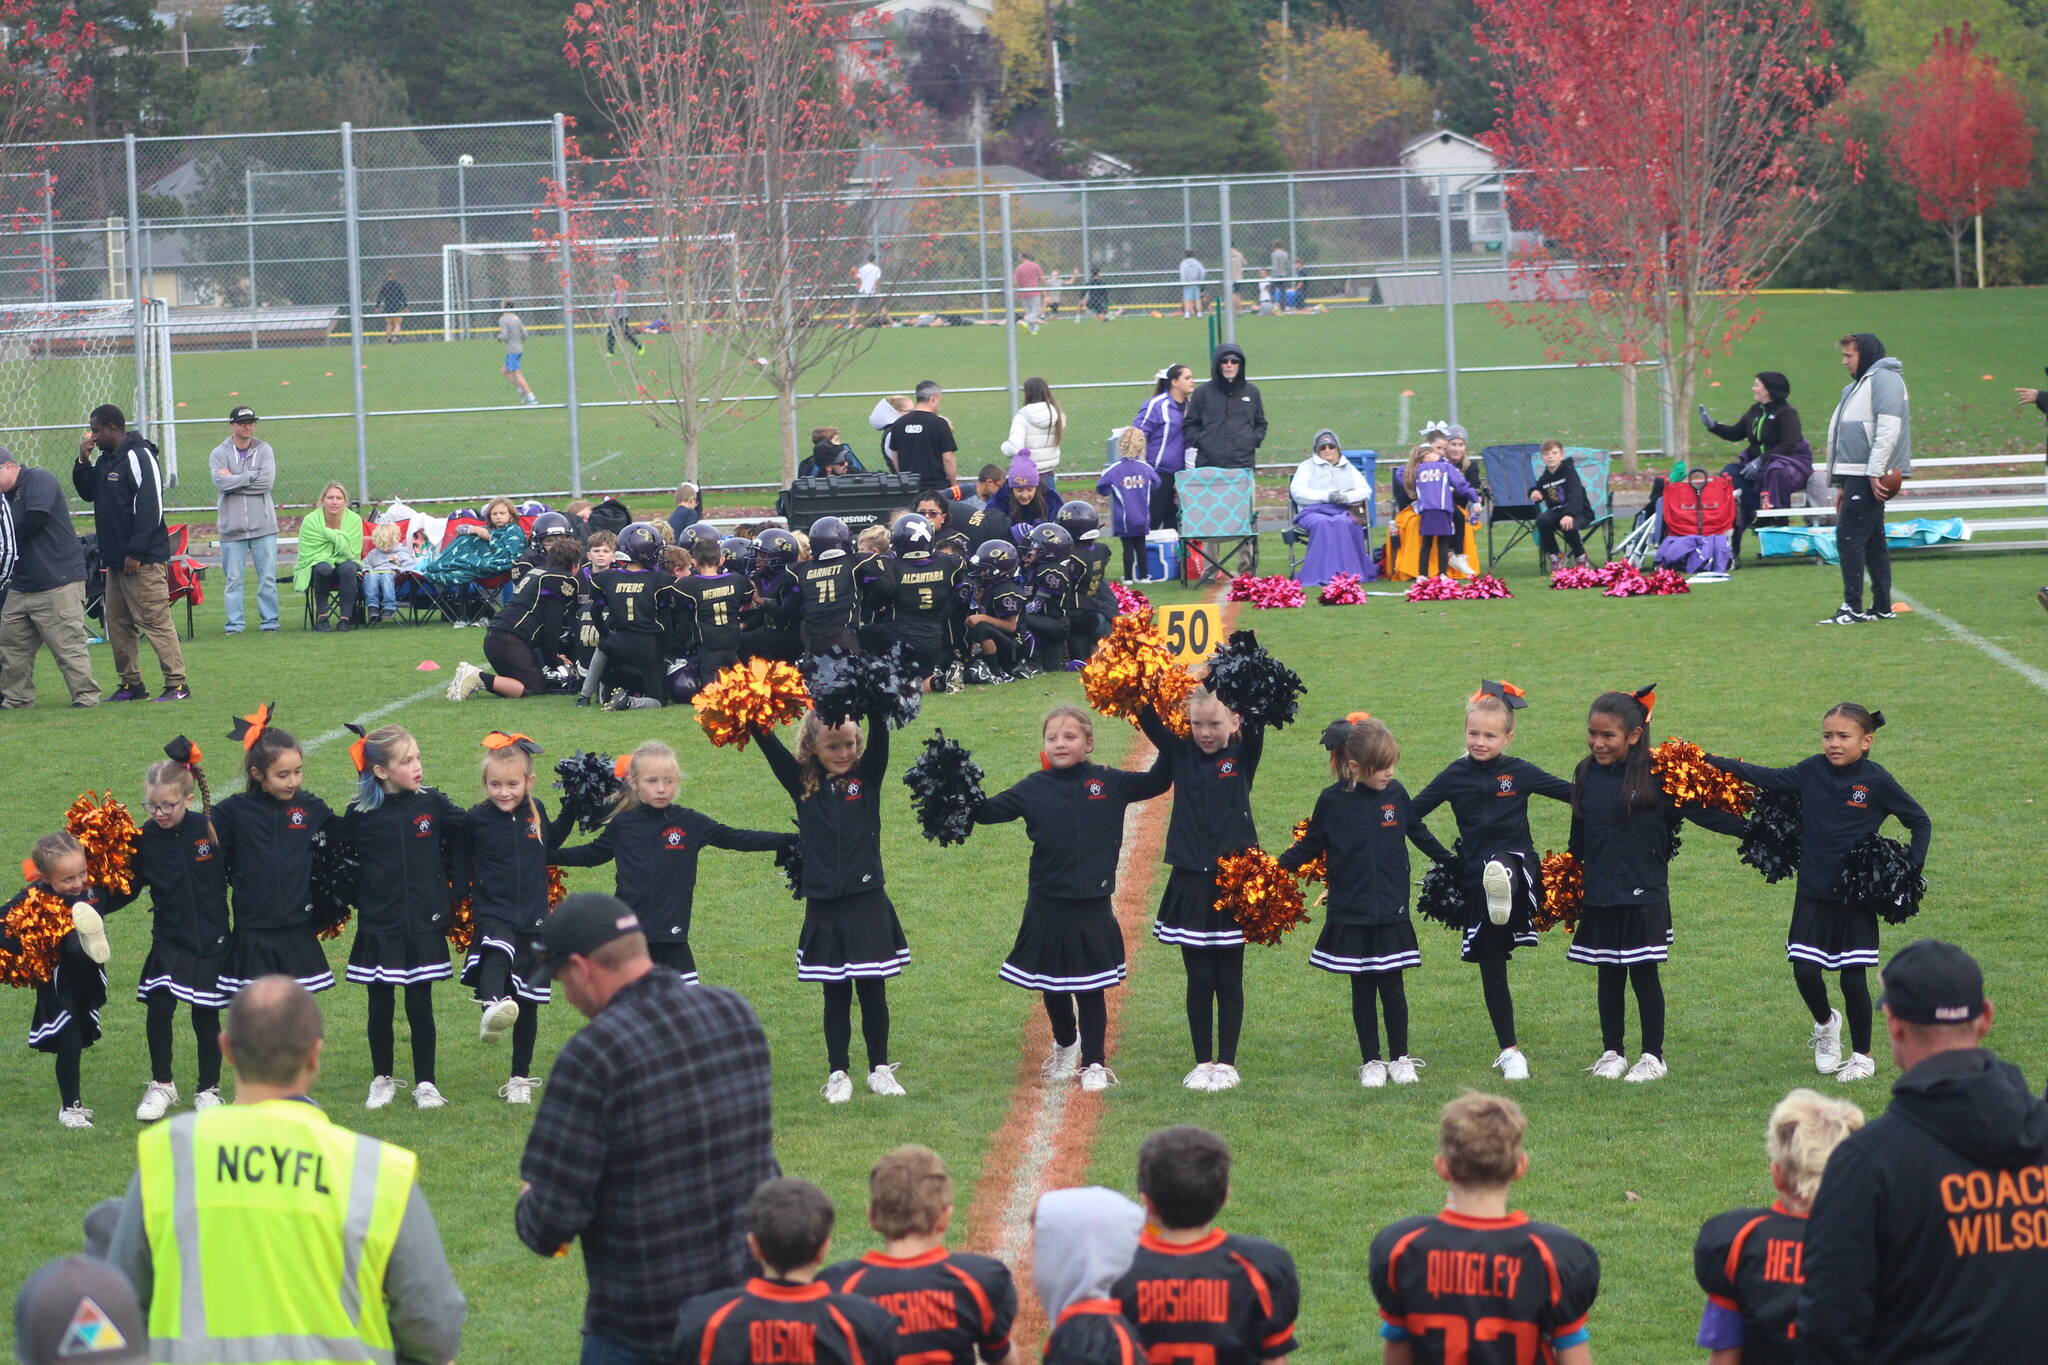 Heather Spaulding \ Staff photo
Cheer squad does the Monster Mash during half time.